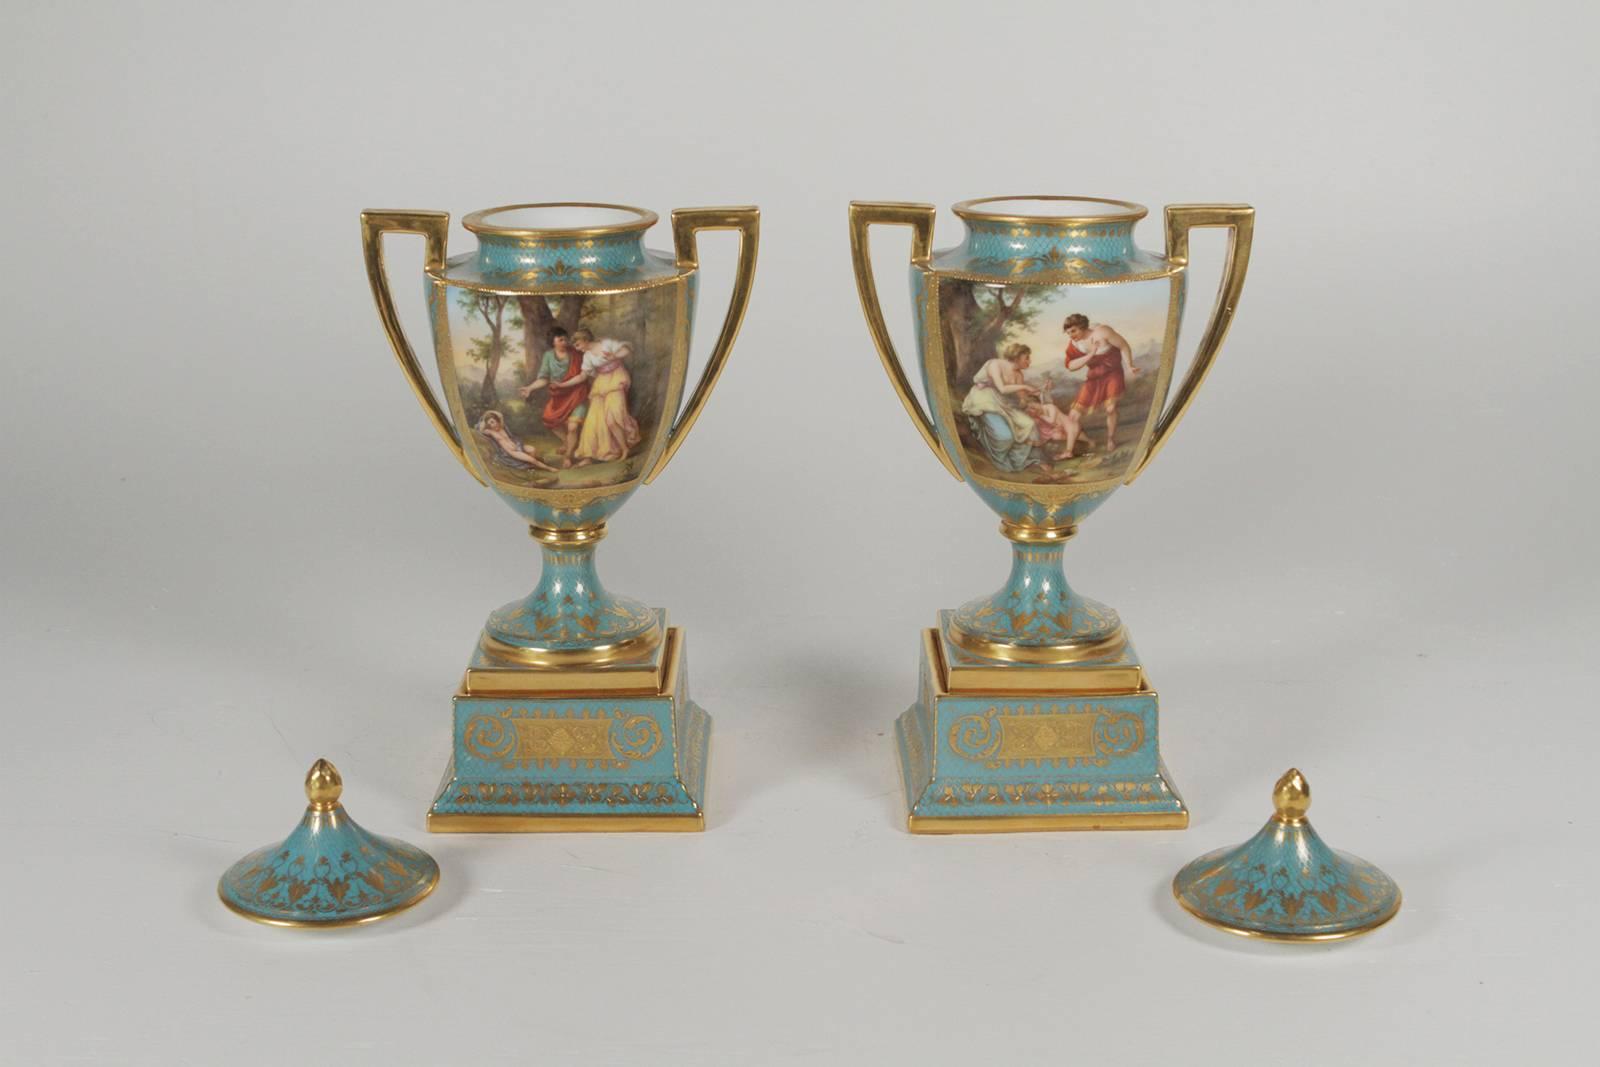 A pair of hand-painted and gilt lidded urns with an Austrian beehive mark on bottom. The unusual robins egg blue background with hand-painted allegorical panels on the fronts. The delicate and elaborate hand gilt details around the panels with